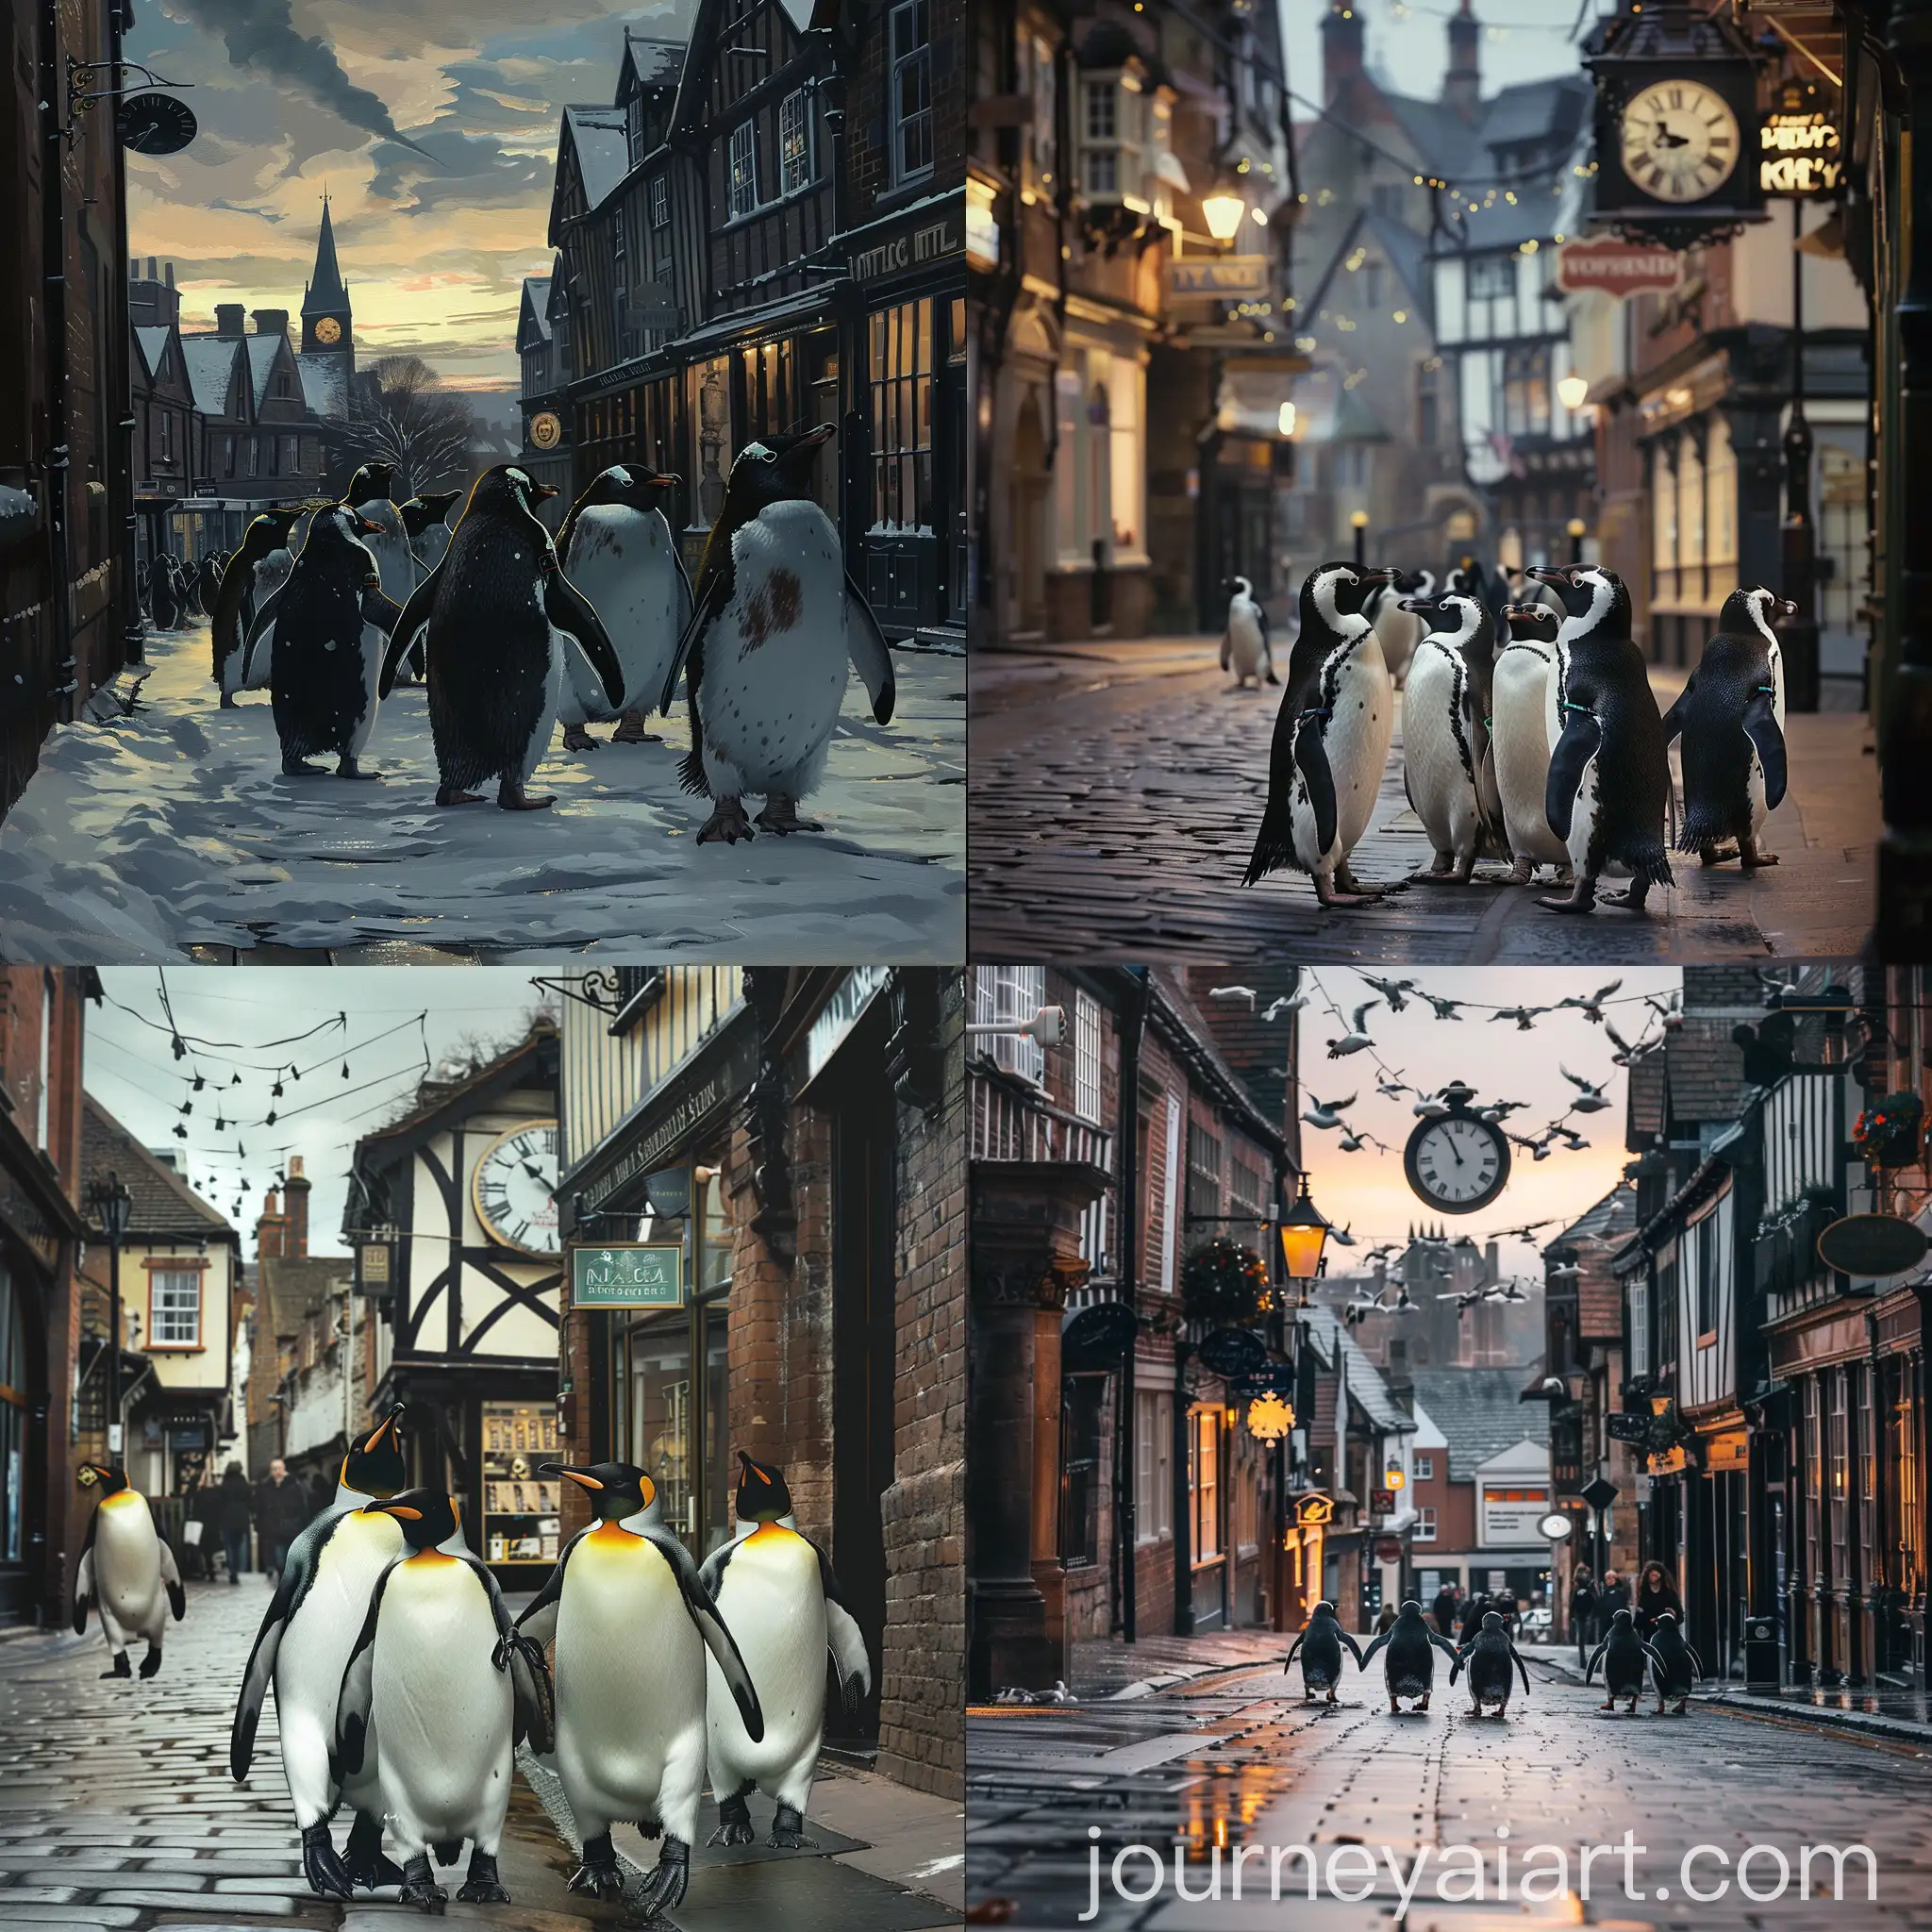 Penguins-Walking-on-Westgate-Street-with-Clock-in-Chester-UK